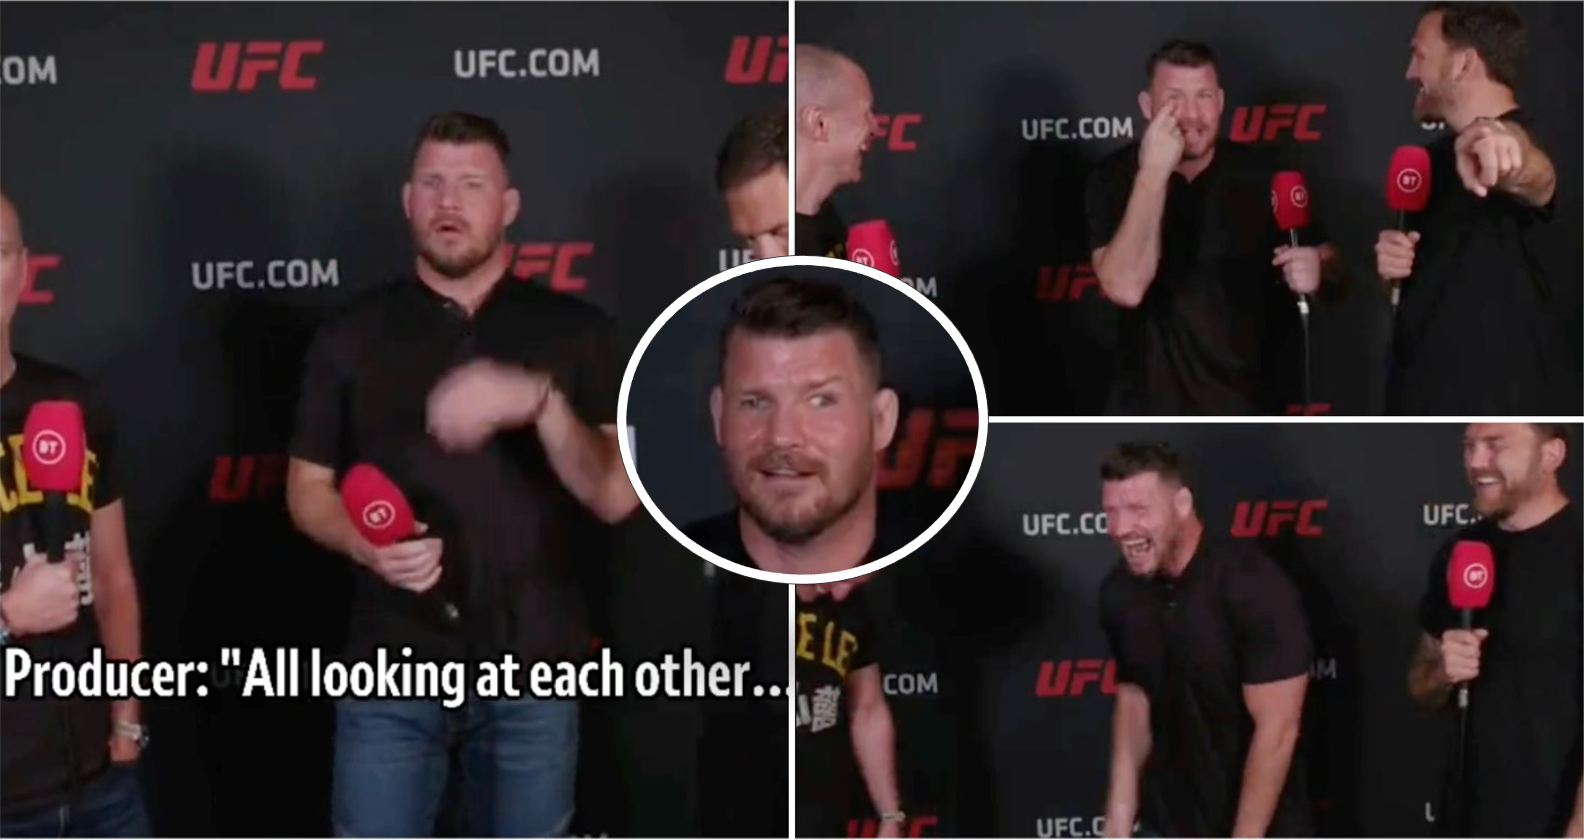 UFC: Michael Bisping plays with fake eye to meet producer's demands in hilarious clip